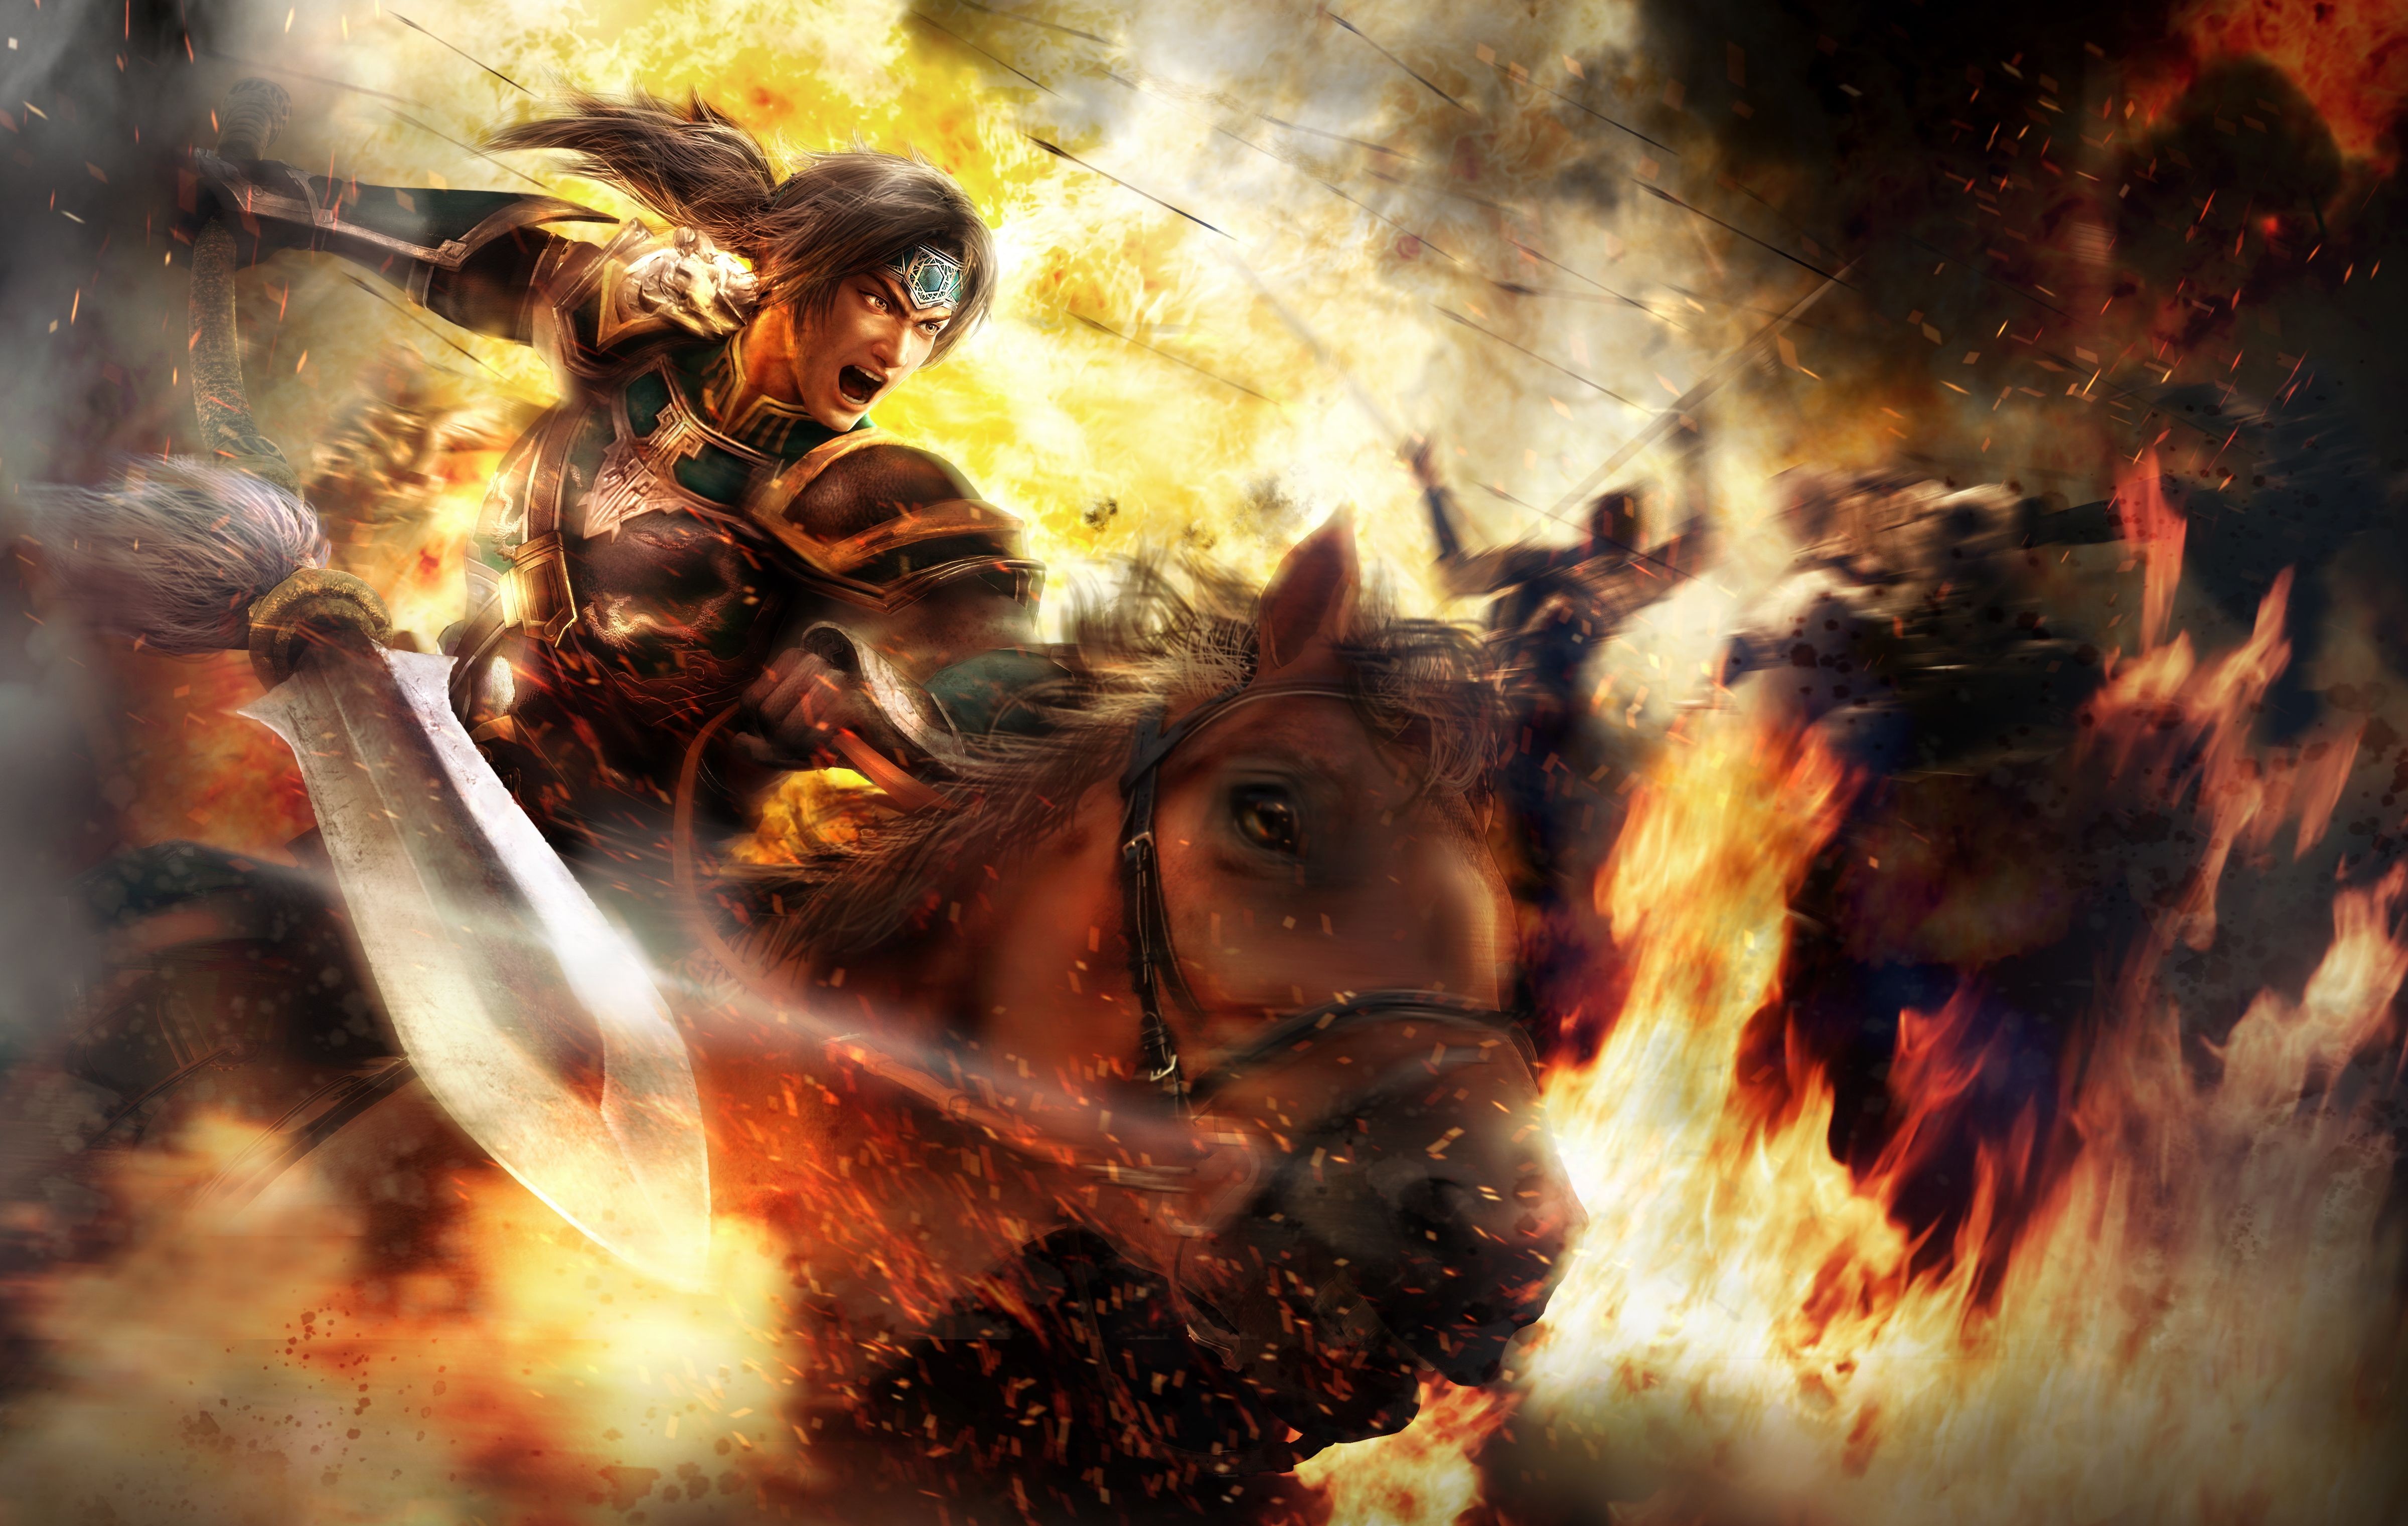 Realistic Dynasty Warriors Warrior Horse Video Games Weapon Fire 4800x3042